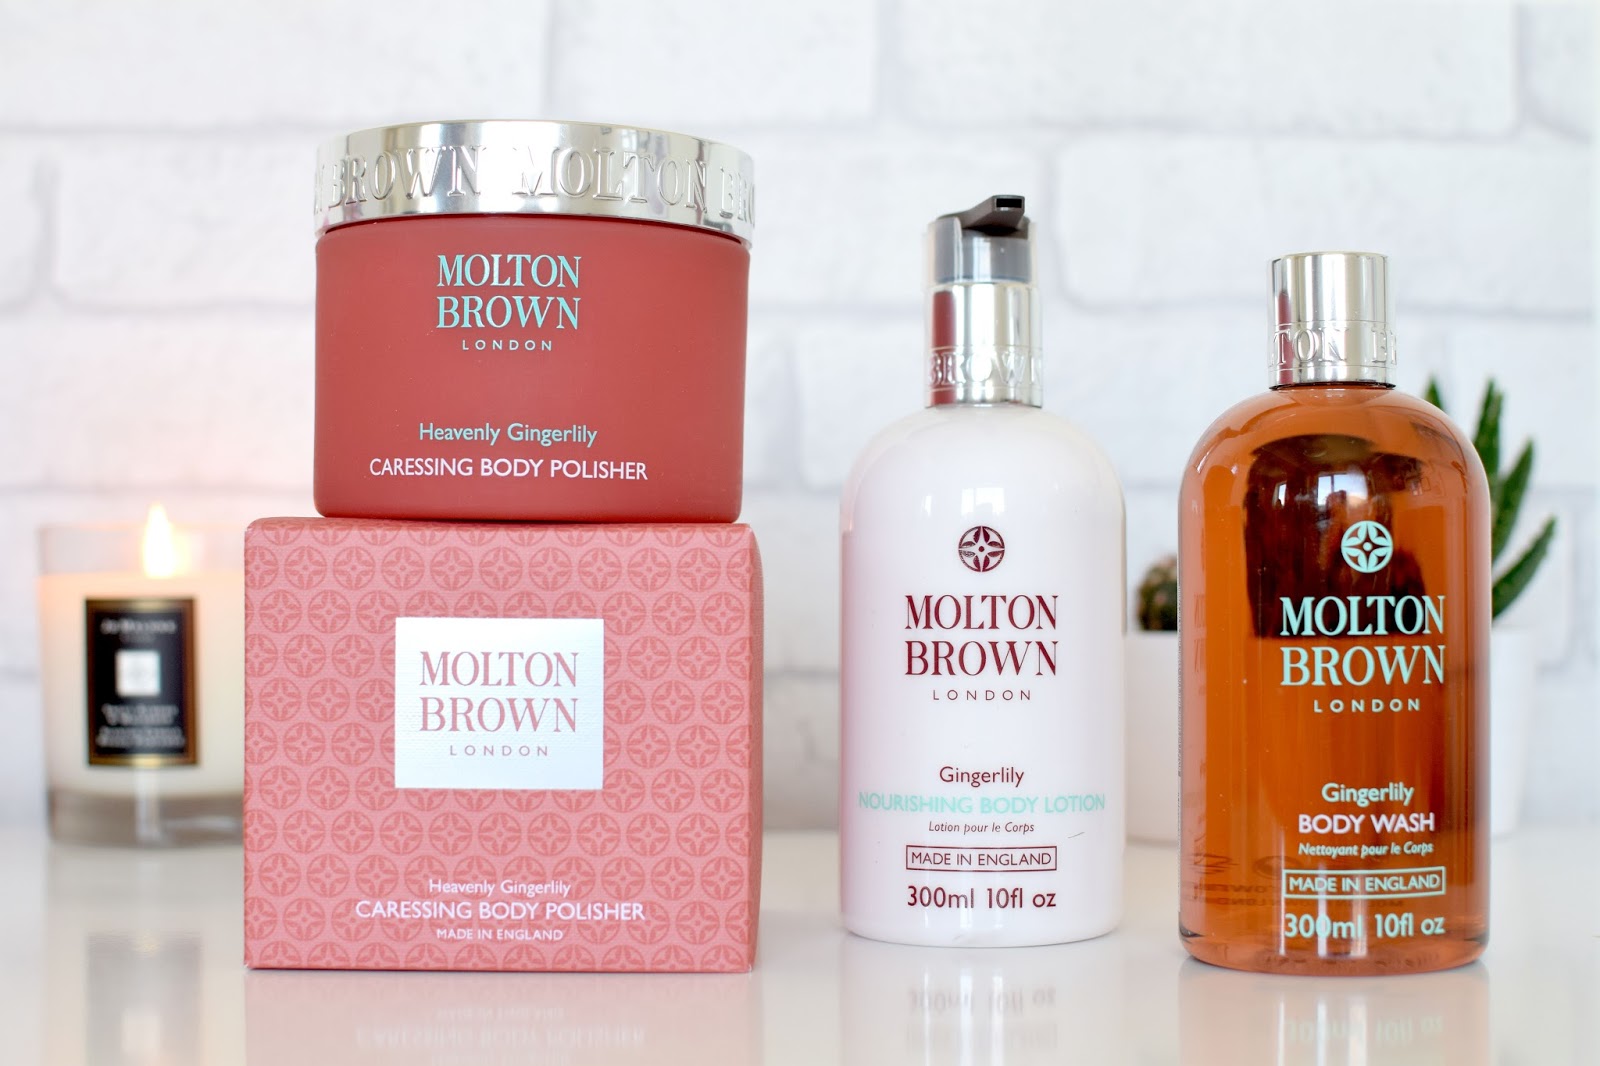 Review Molton Brown Heavenly Gingerlily Bodycare Blonde Ambition.